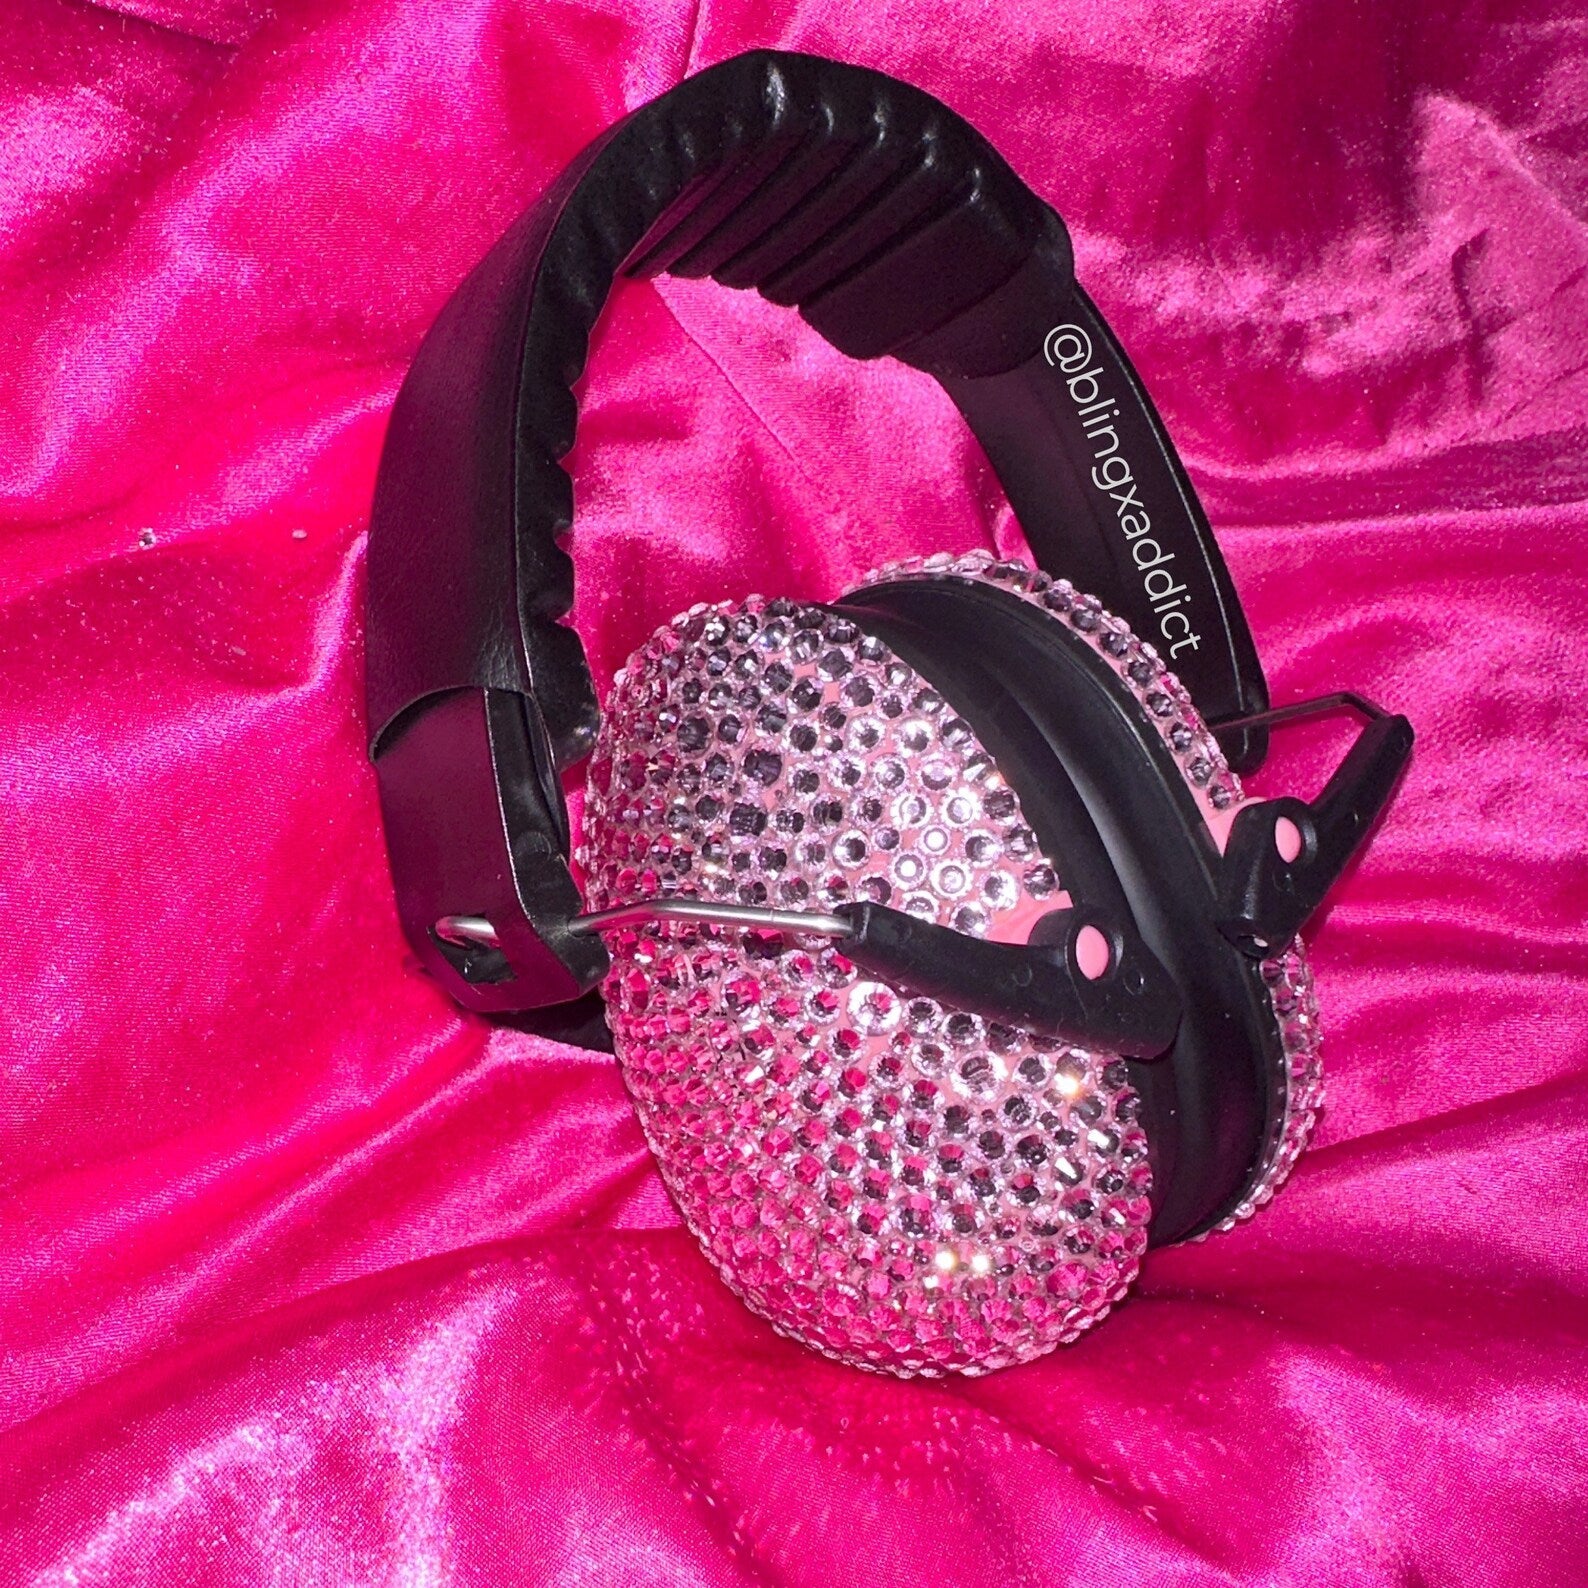 Crystalized Hearing Protection and Noise Reduction Earmuffs Lightweight, Adjustable and Foldable NRR 20dB CLOTHING, SHOES & ACCESSORIES by BlingxAddict | BlingxAddict